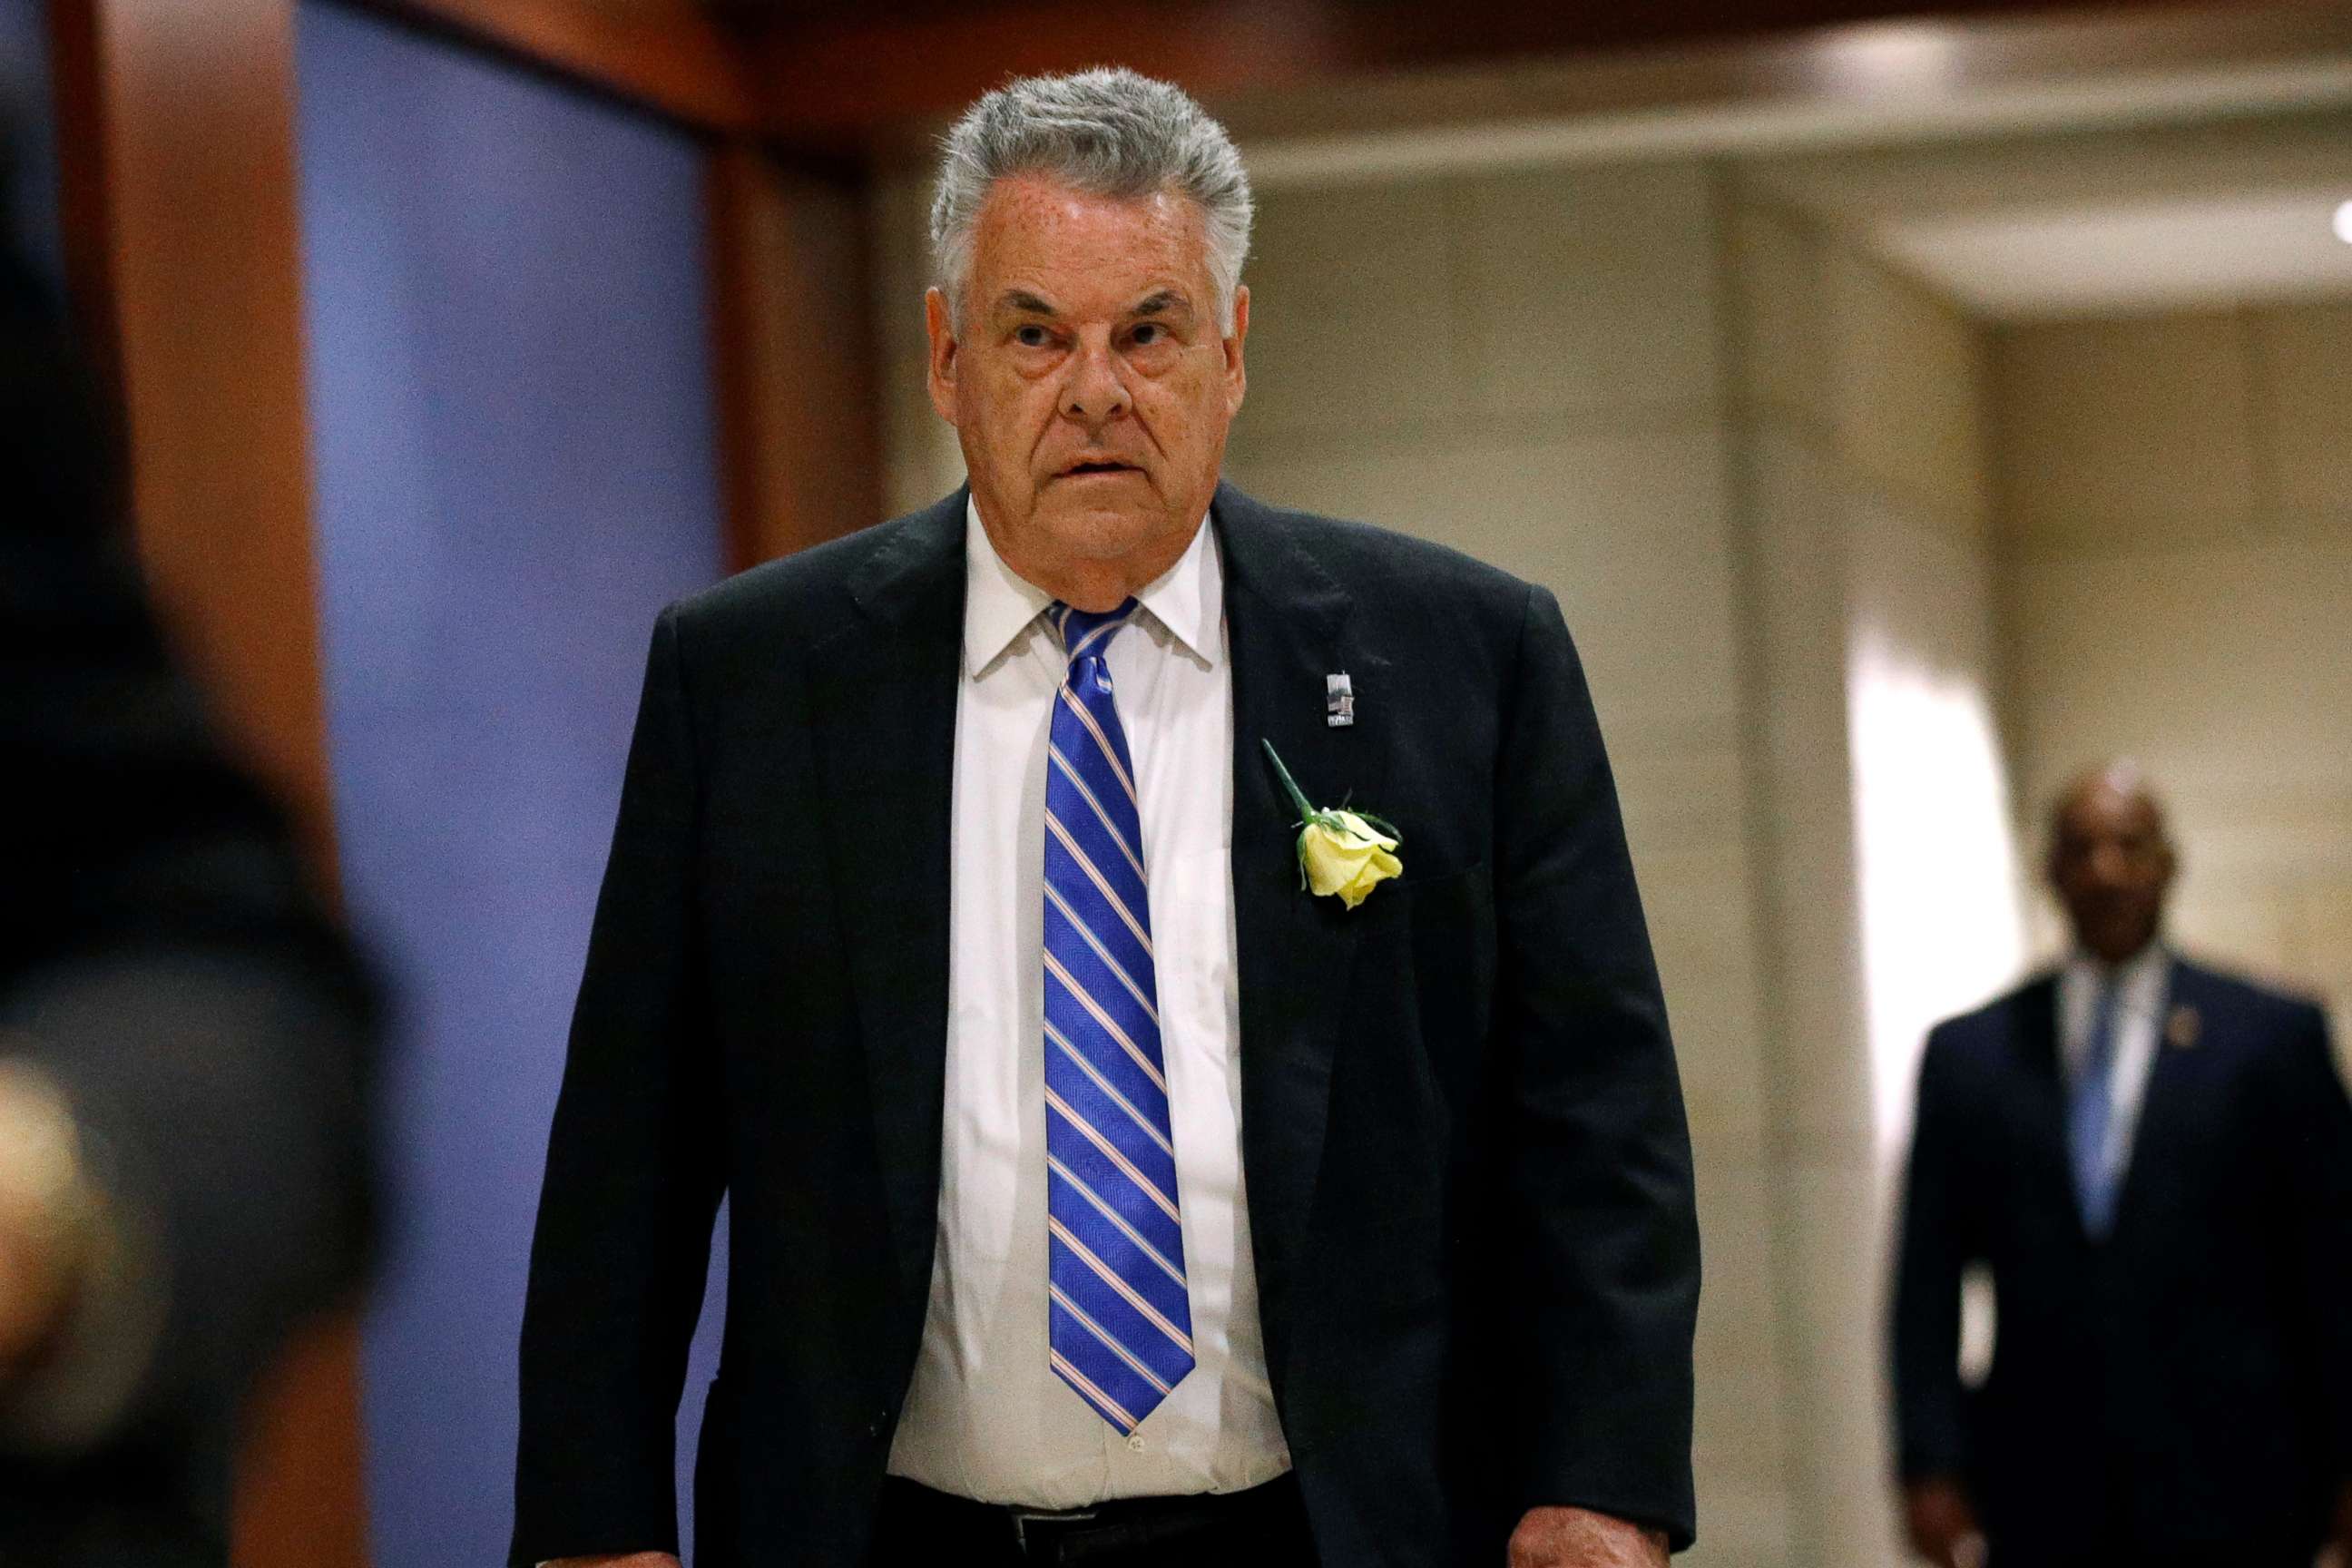 PHOTO: In this May 21, 2019, photo, Rep. Peter King, R-N.Y., arrives for a classified members-only briefing on Iran on Capitol Hill in Washington. King announced Monday, Nov. 11, 2019,  he will retire in 2020. (AP Photo/Patrick Semansky, File)